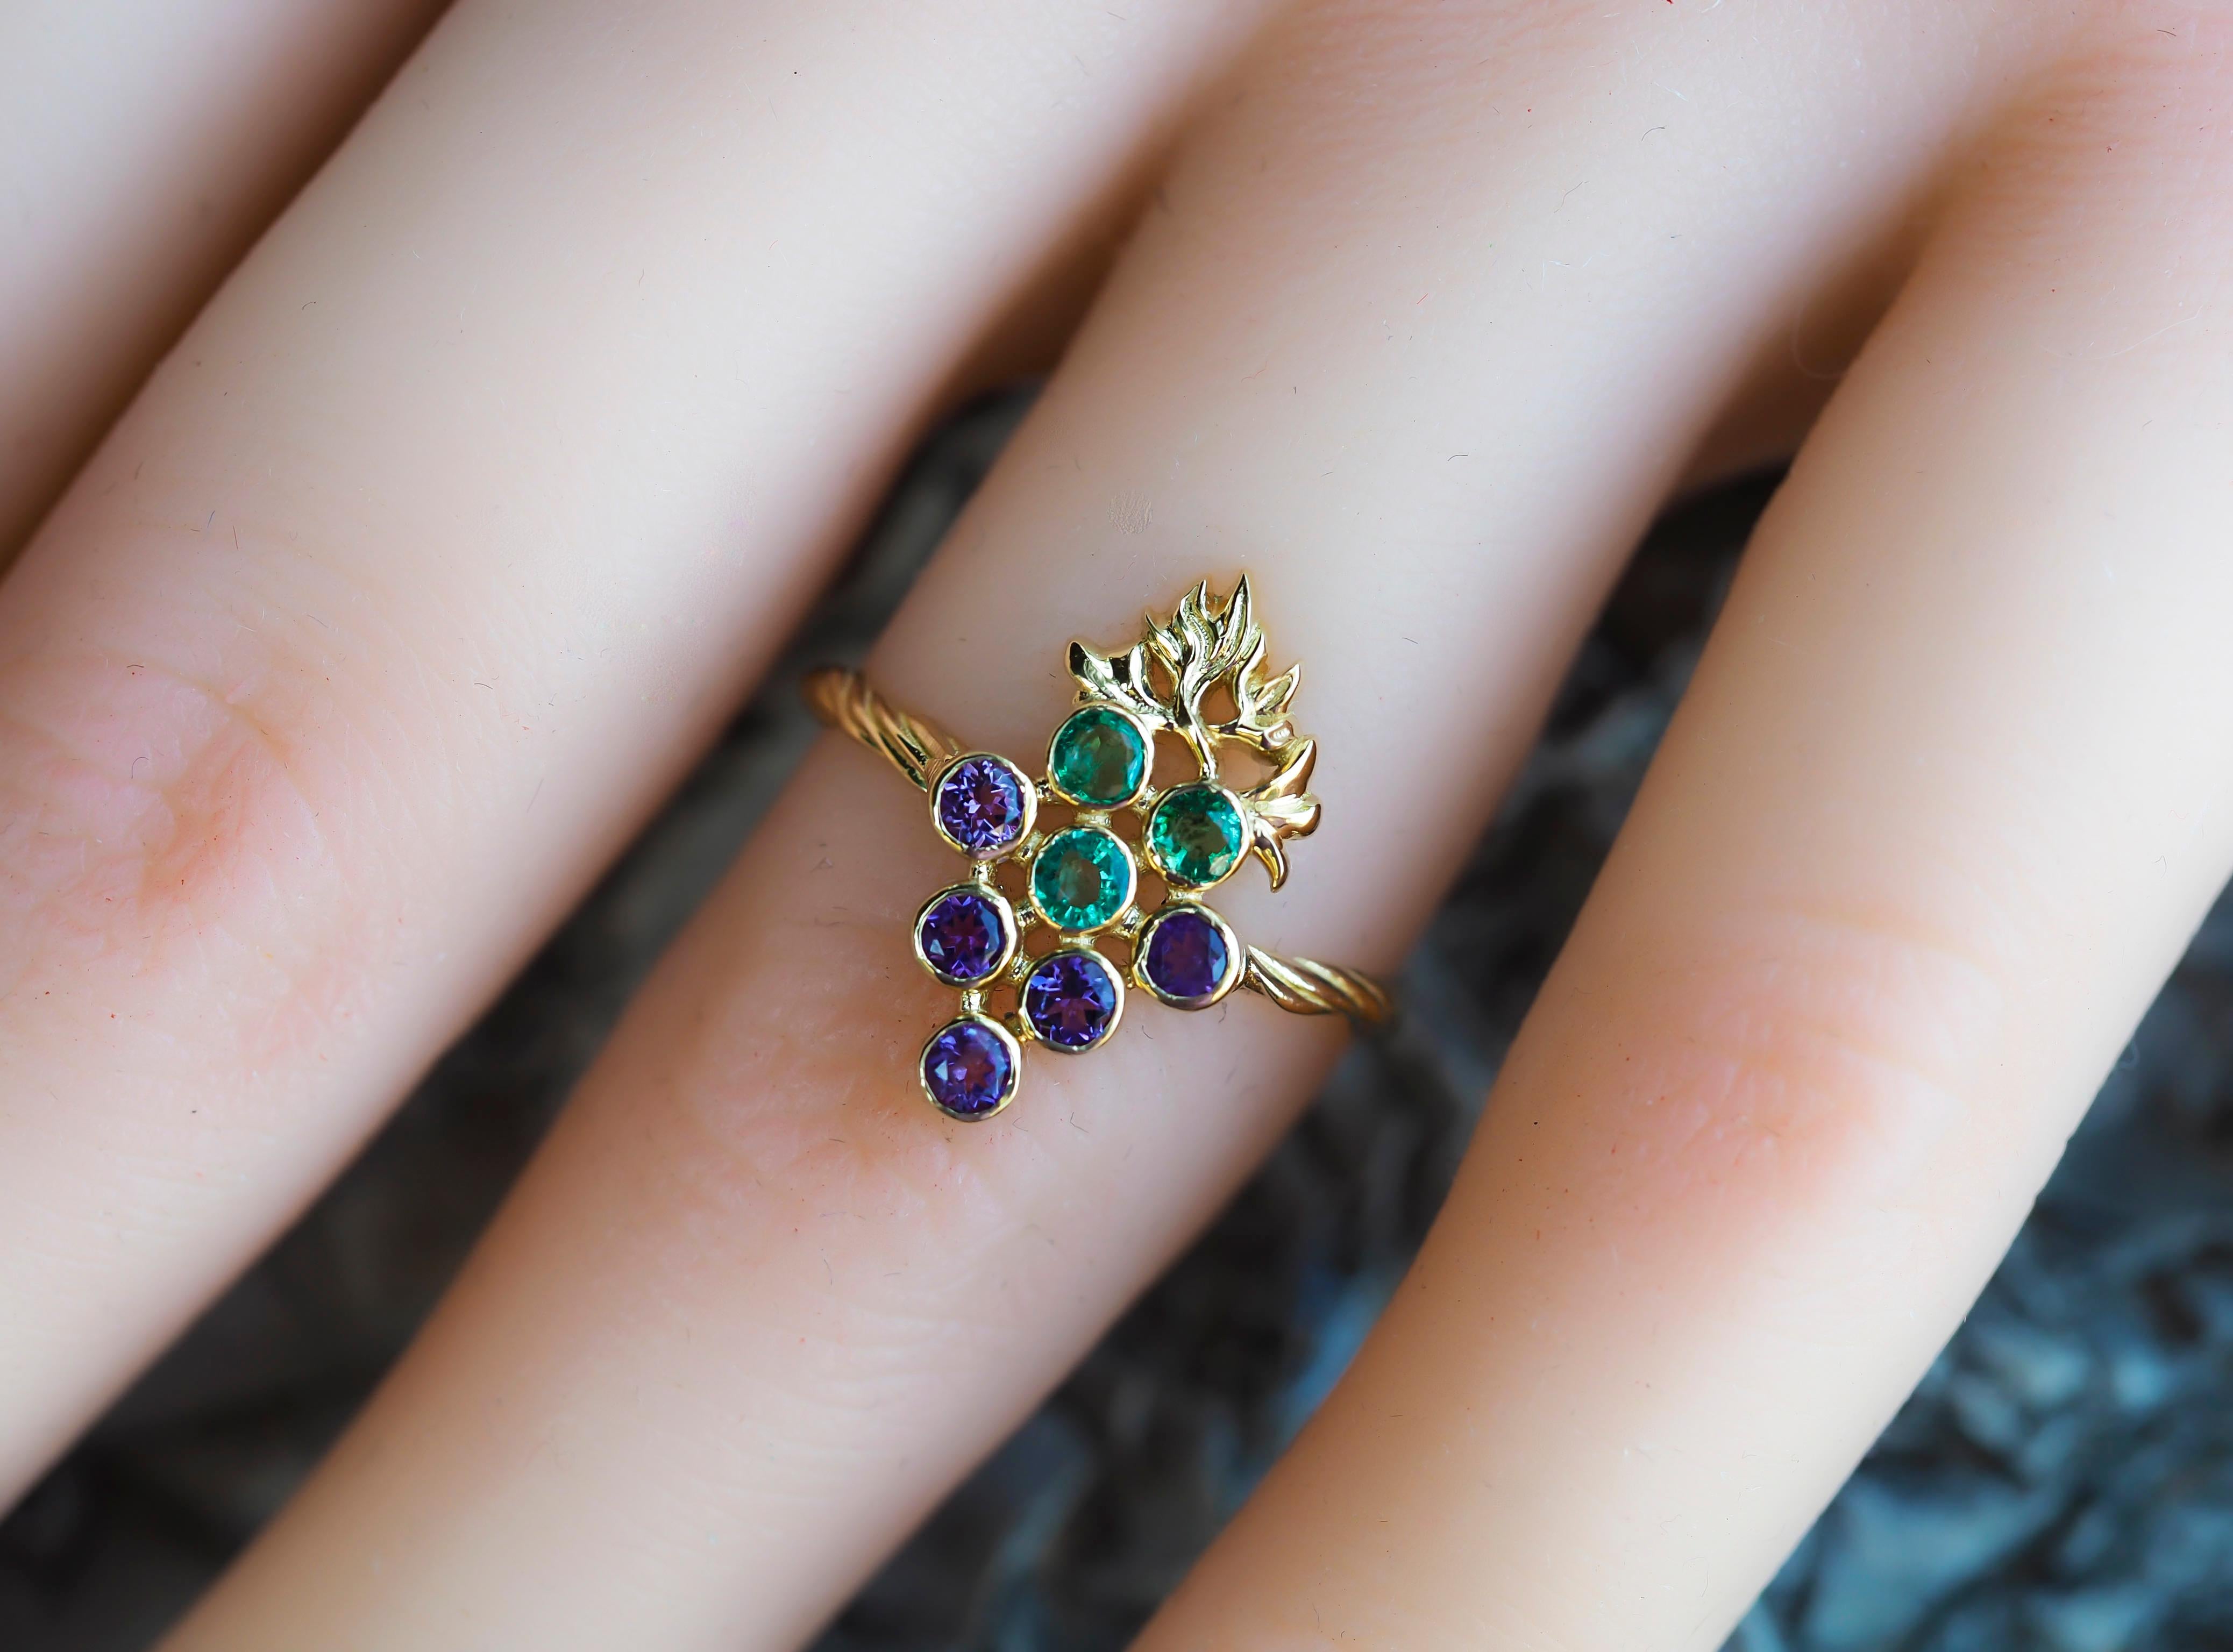 For Sale:  14k Gold Ring with Natural Emeralds and Amethysts. Grape gold ring. 11